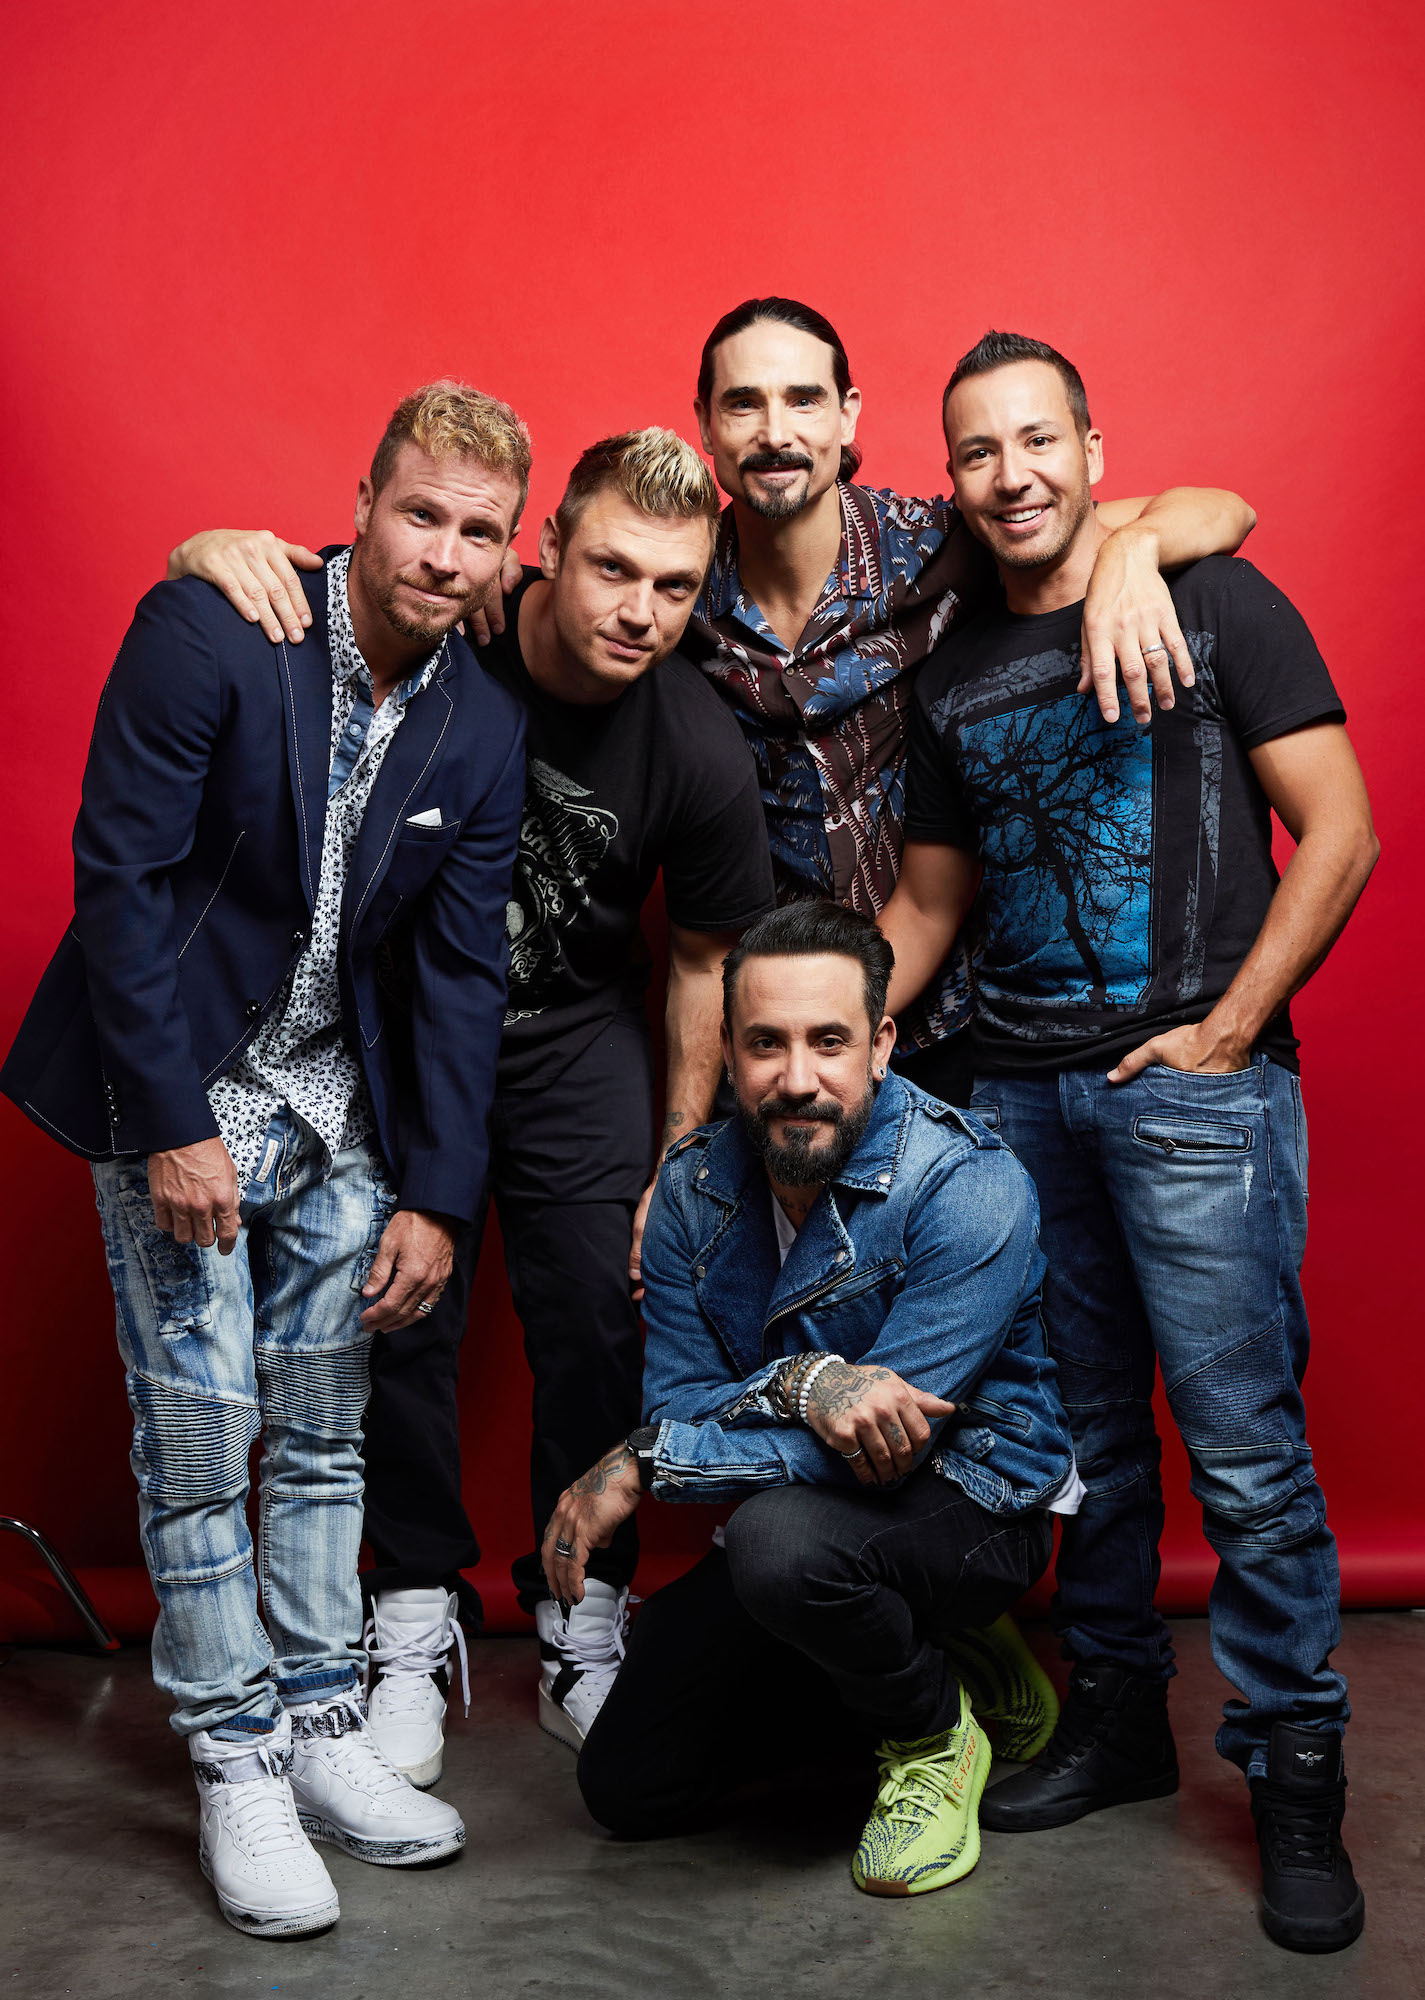 Backstreet Boys: Where are they now?